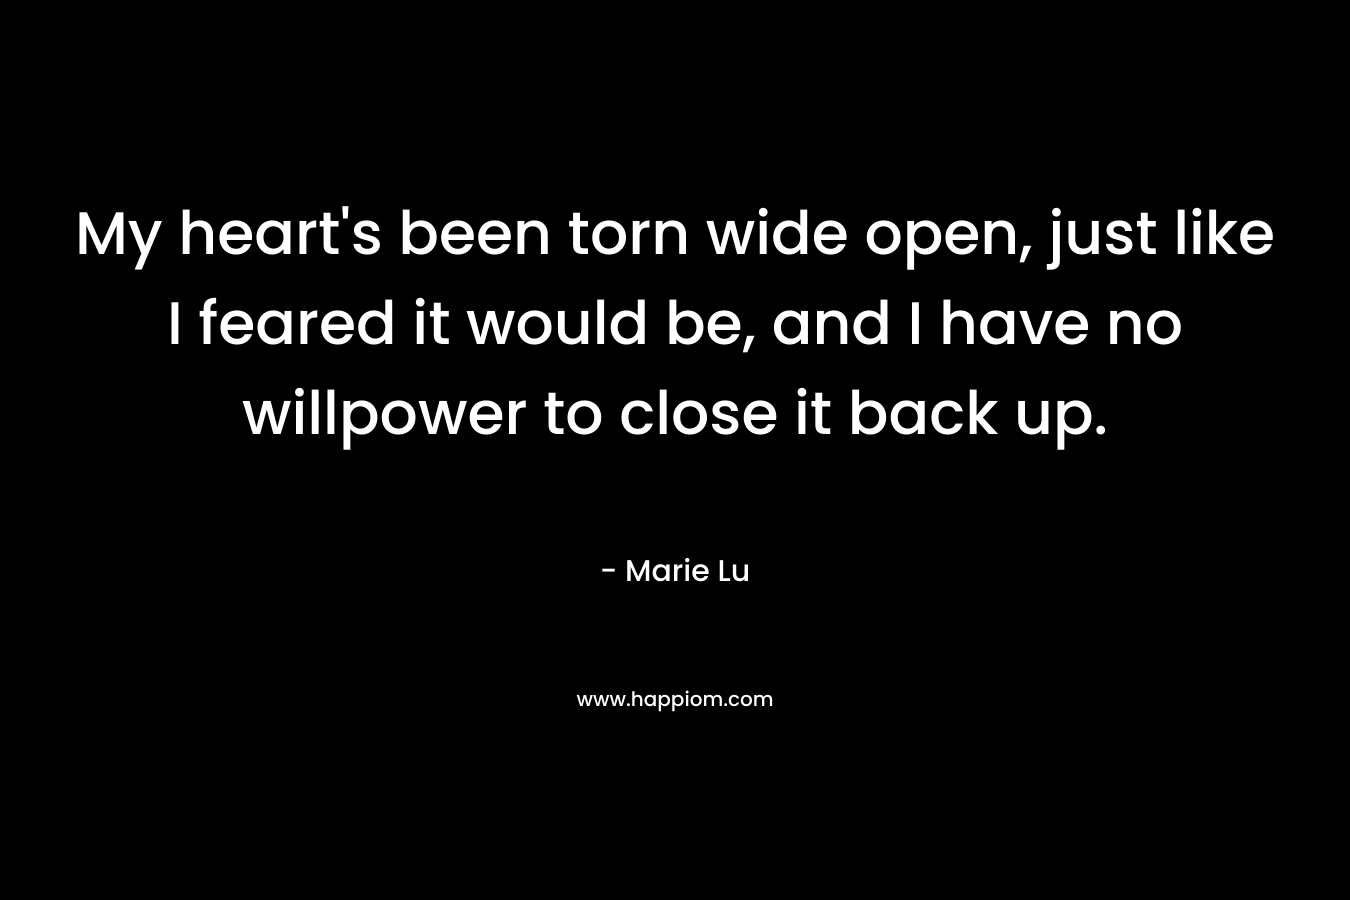 My heart’s been torn wide open, just like I feared it would be, and I have no willpower to close it back up. – Marie Lu